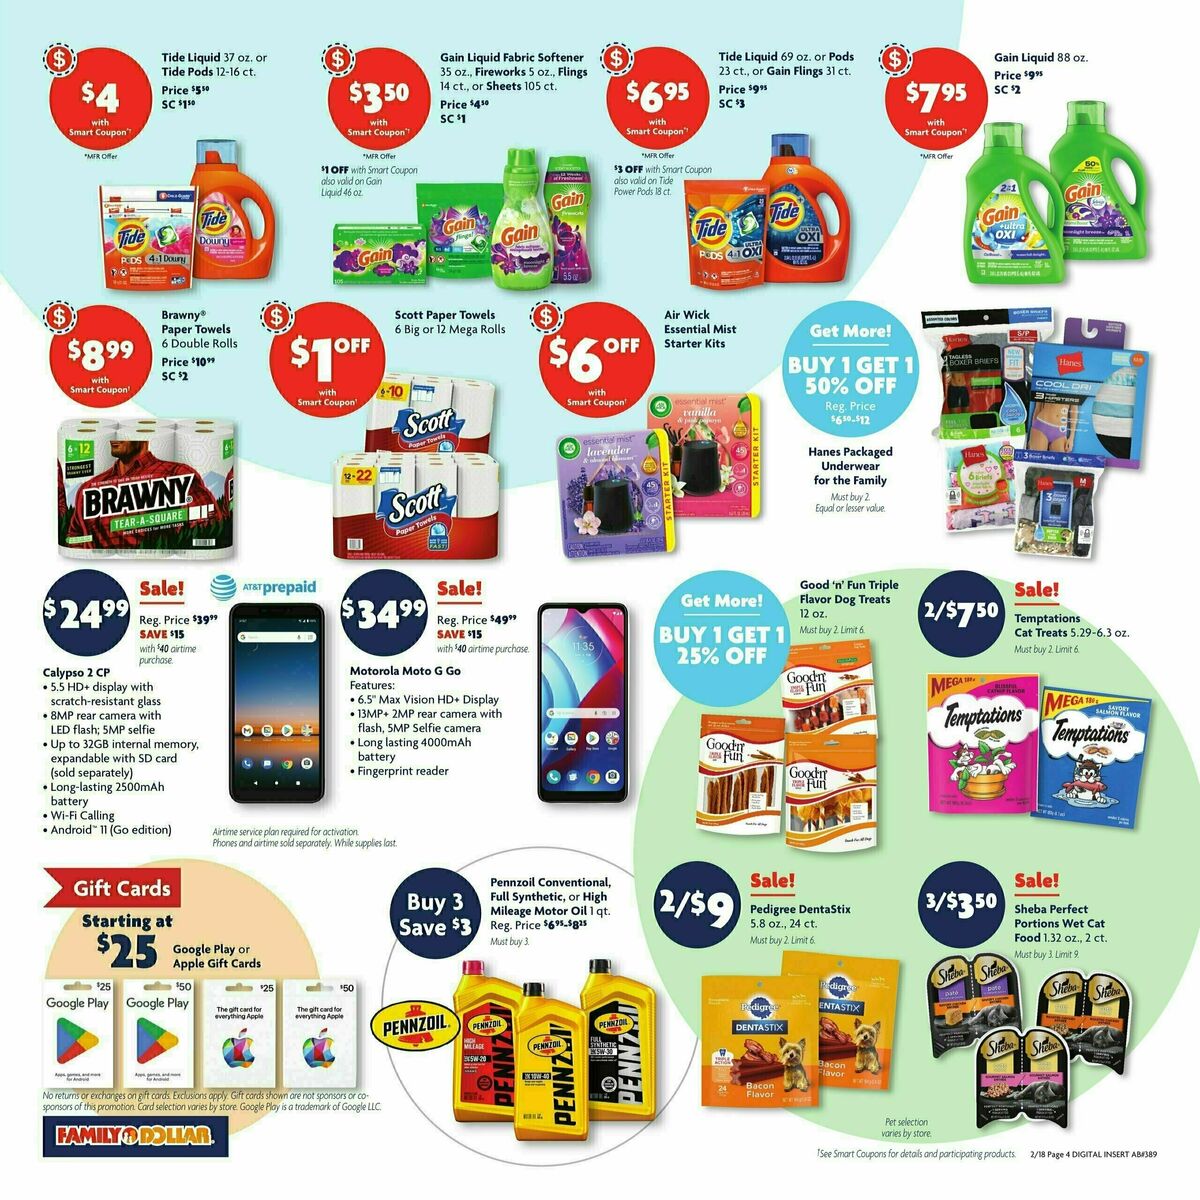 Family Dollar Weekly Ad from February 18